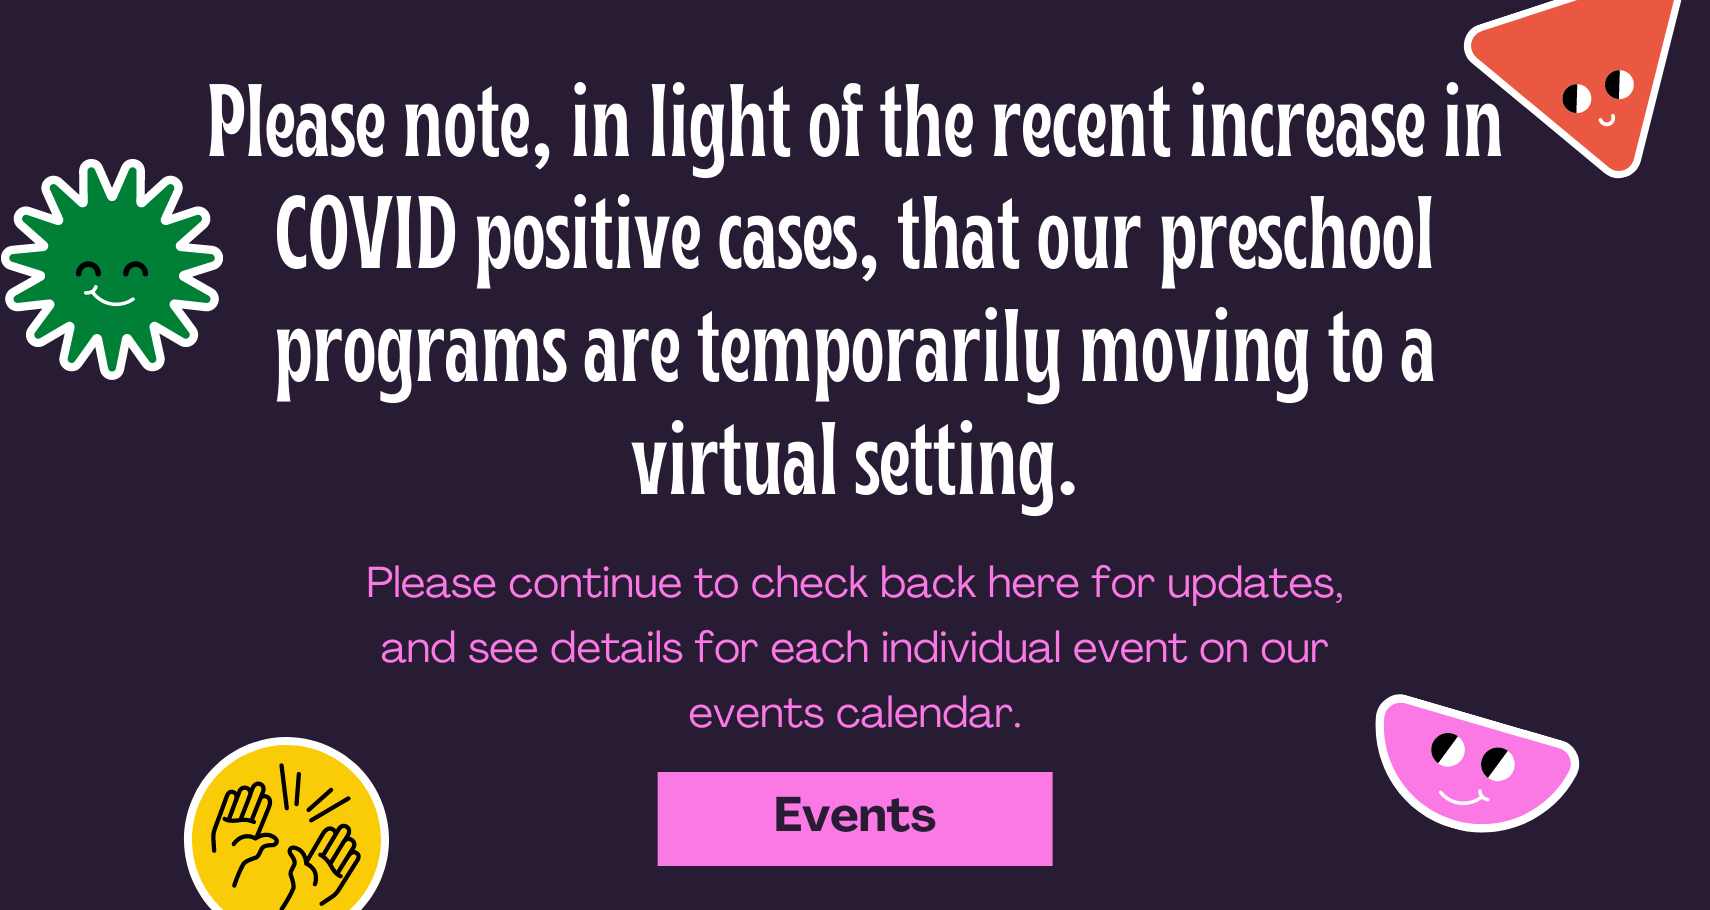 Slide with text: Please note, in light of the recent increase in COVID positive cases, that our preschool programs are temporarily moving to a virtual setting. Please continue to check back here for updates, and see details for each individual event on our events calendar.